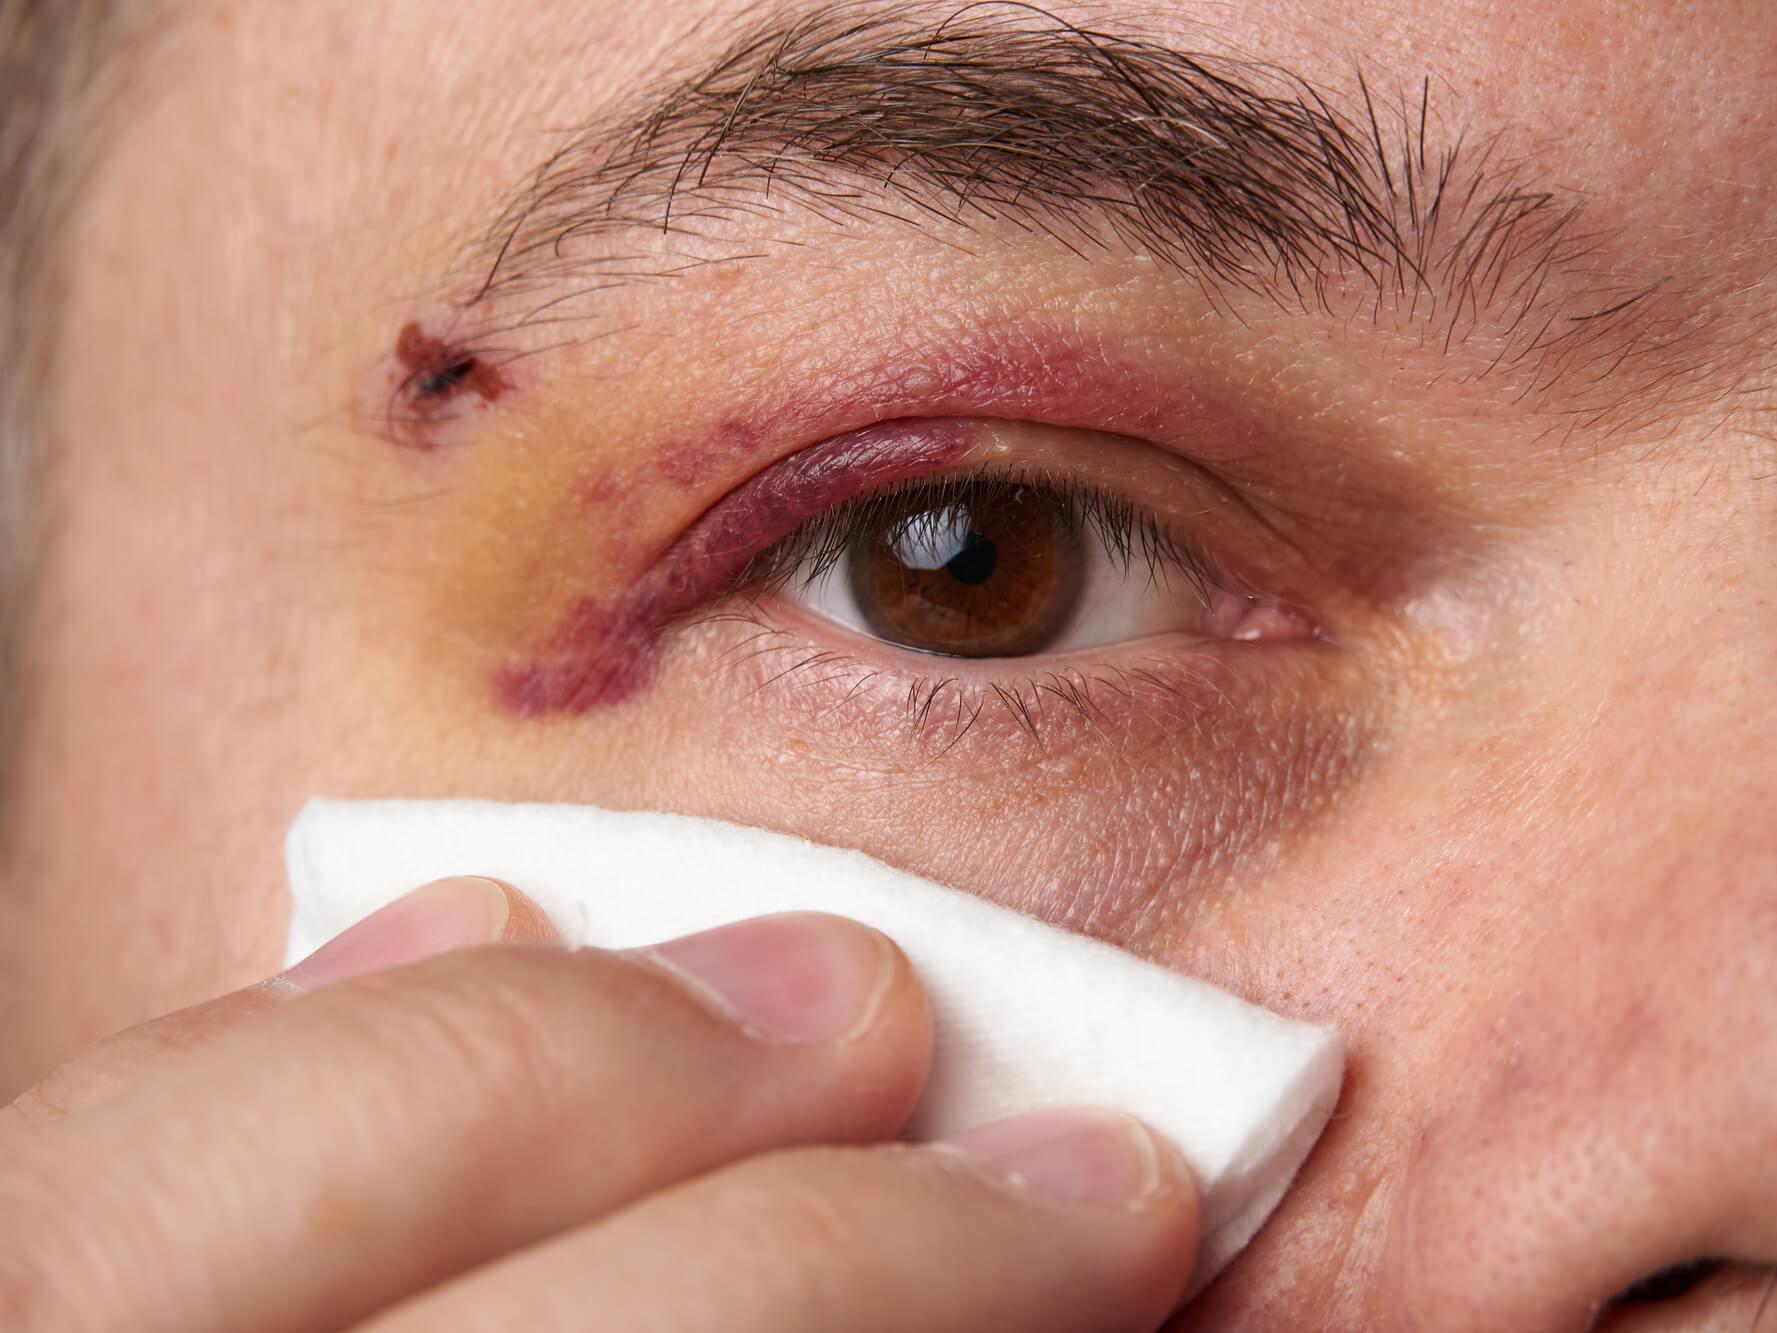 Applying a cold compress to the eye area shortly after an injury can reduce swelling and soothe pain.